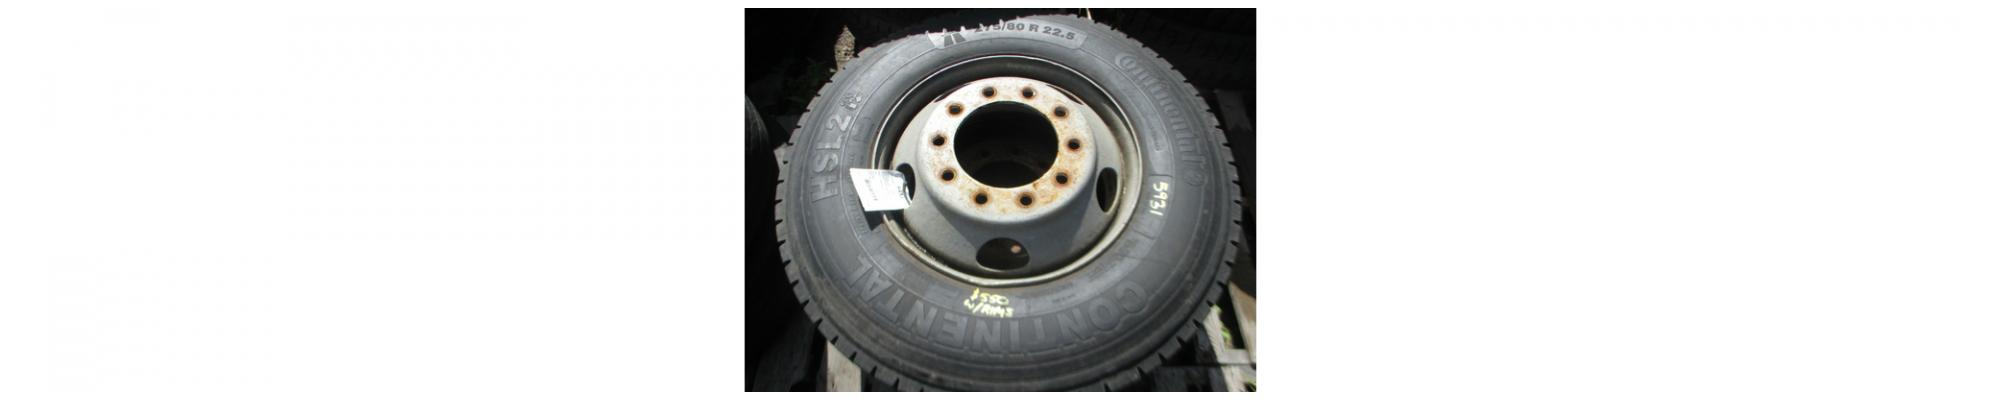 275/80/R22.5 Tire and Rim in Enfield, CT #5931